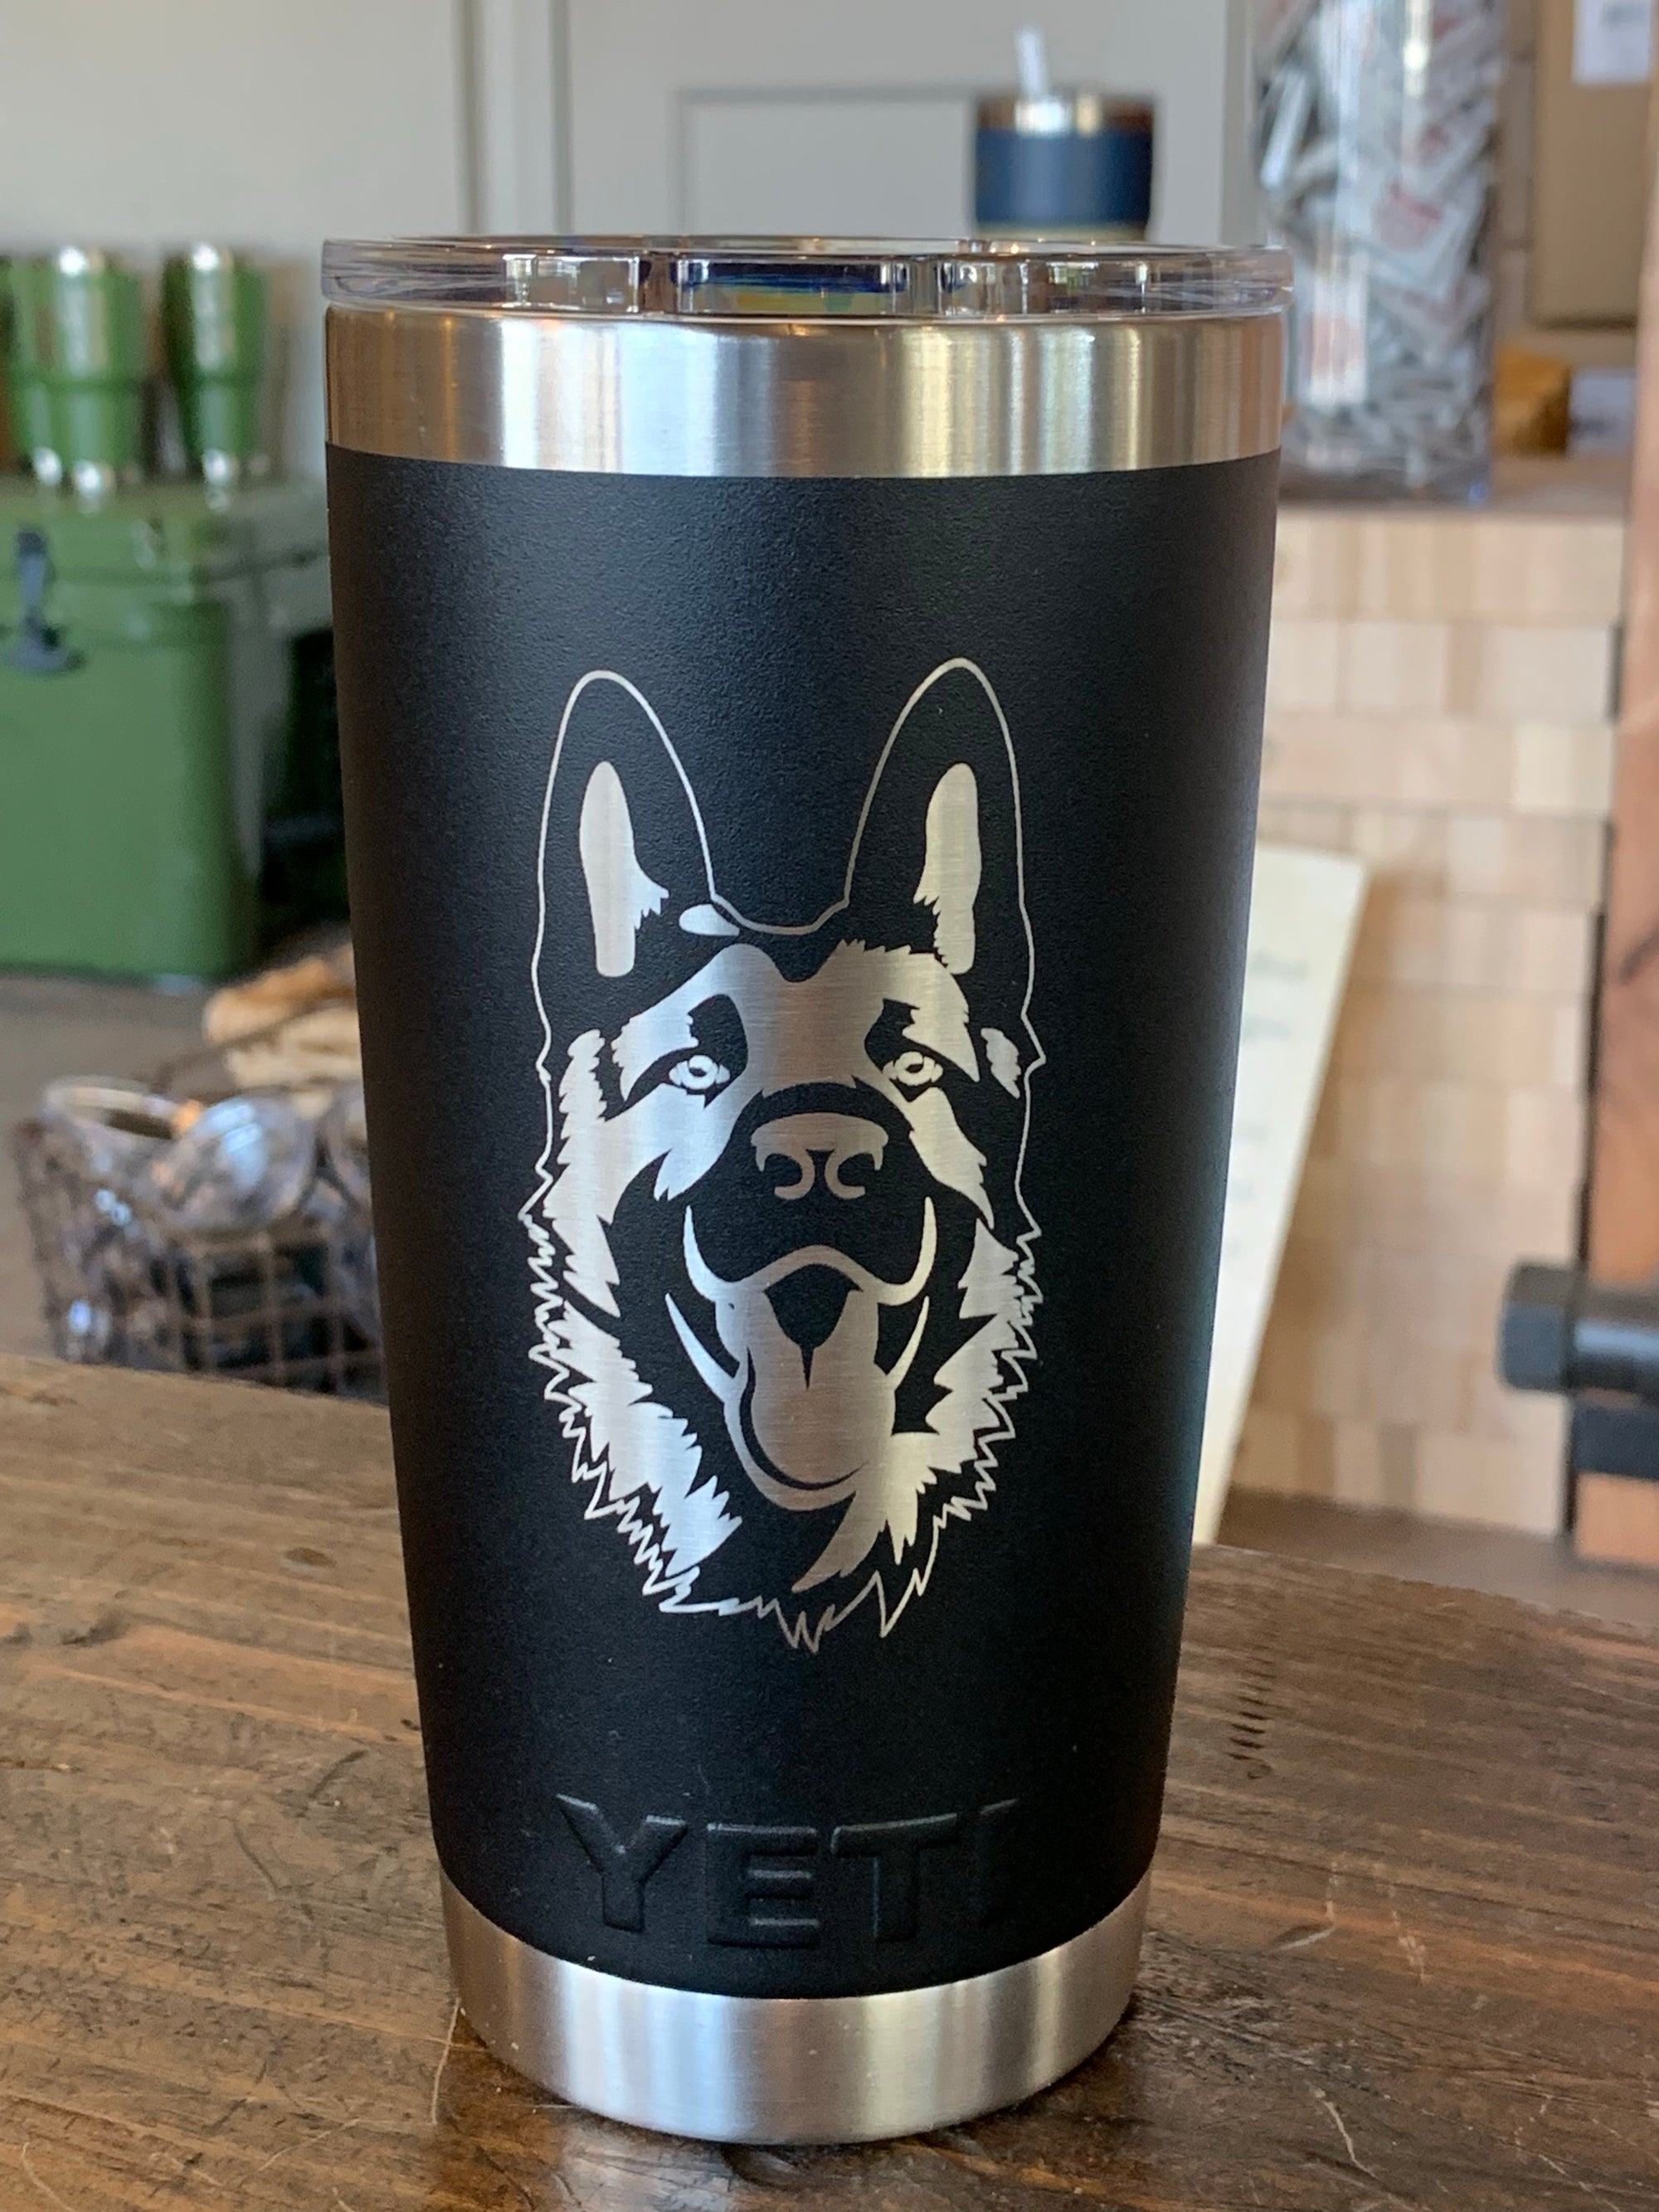 REAL YETI 26 Oz. Laser Engraved Canopy Green Stainless Steel Yeti